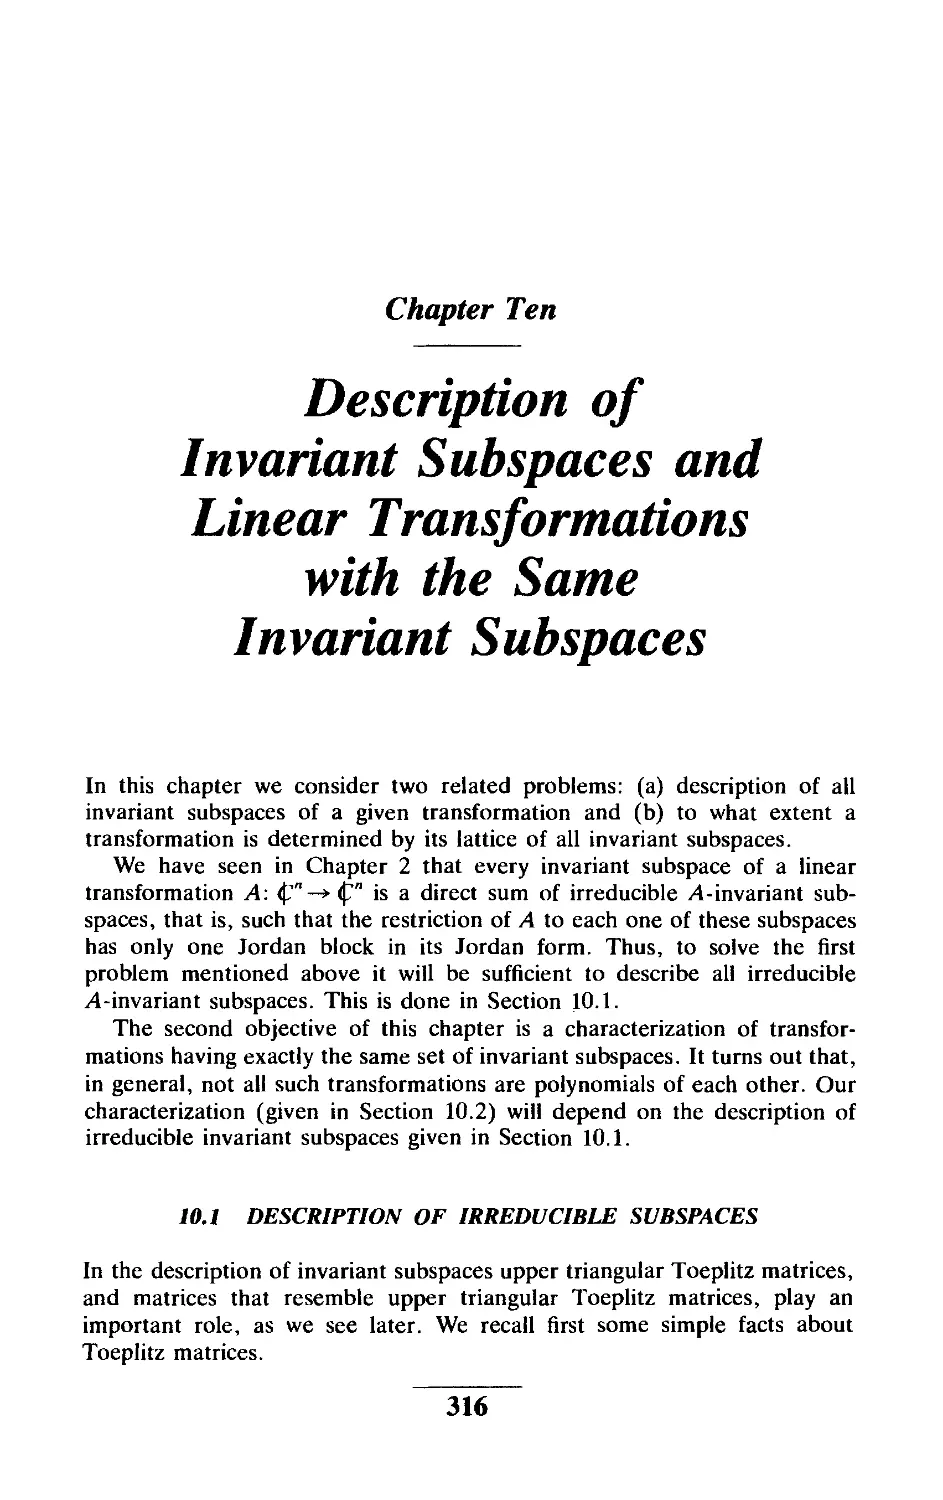 Chapter Ten Description of Invariant Subspaces and Linear Transformations with the Same Invariant Subspaces